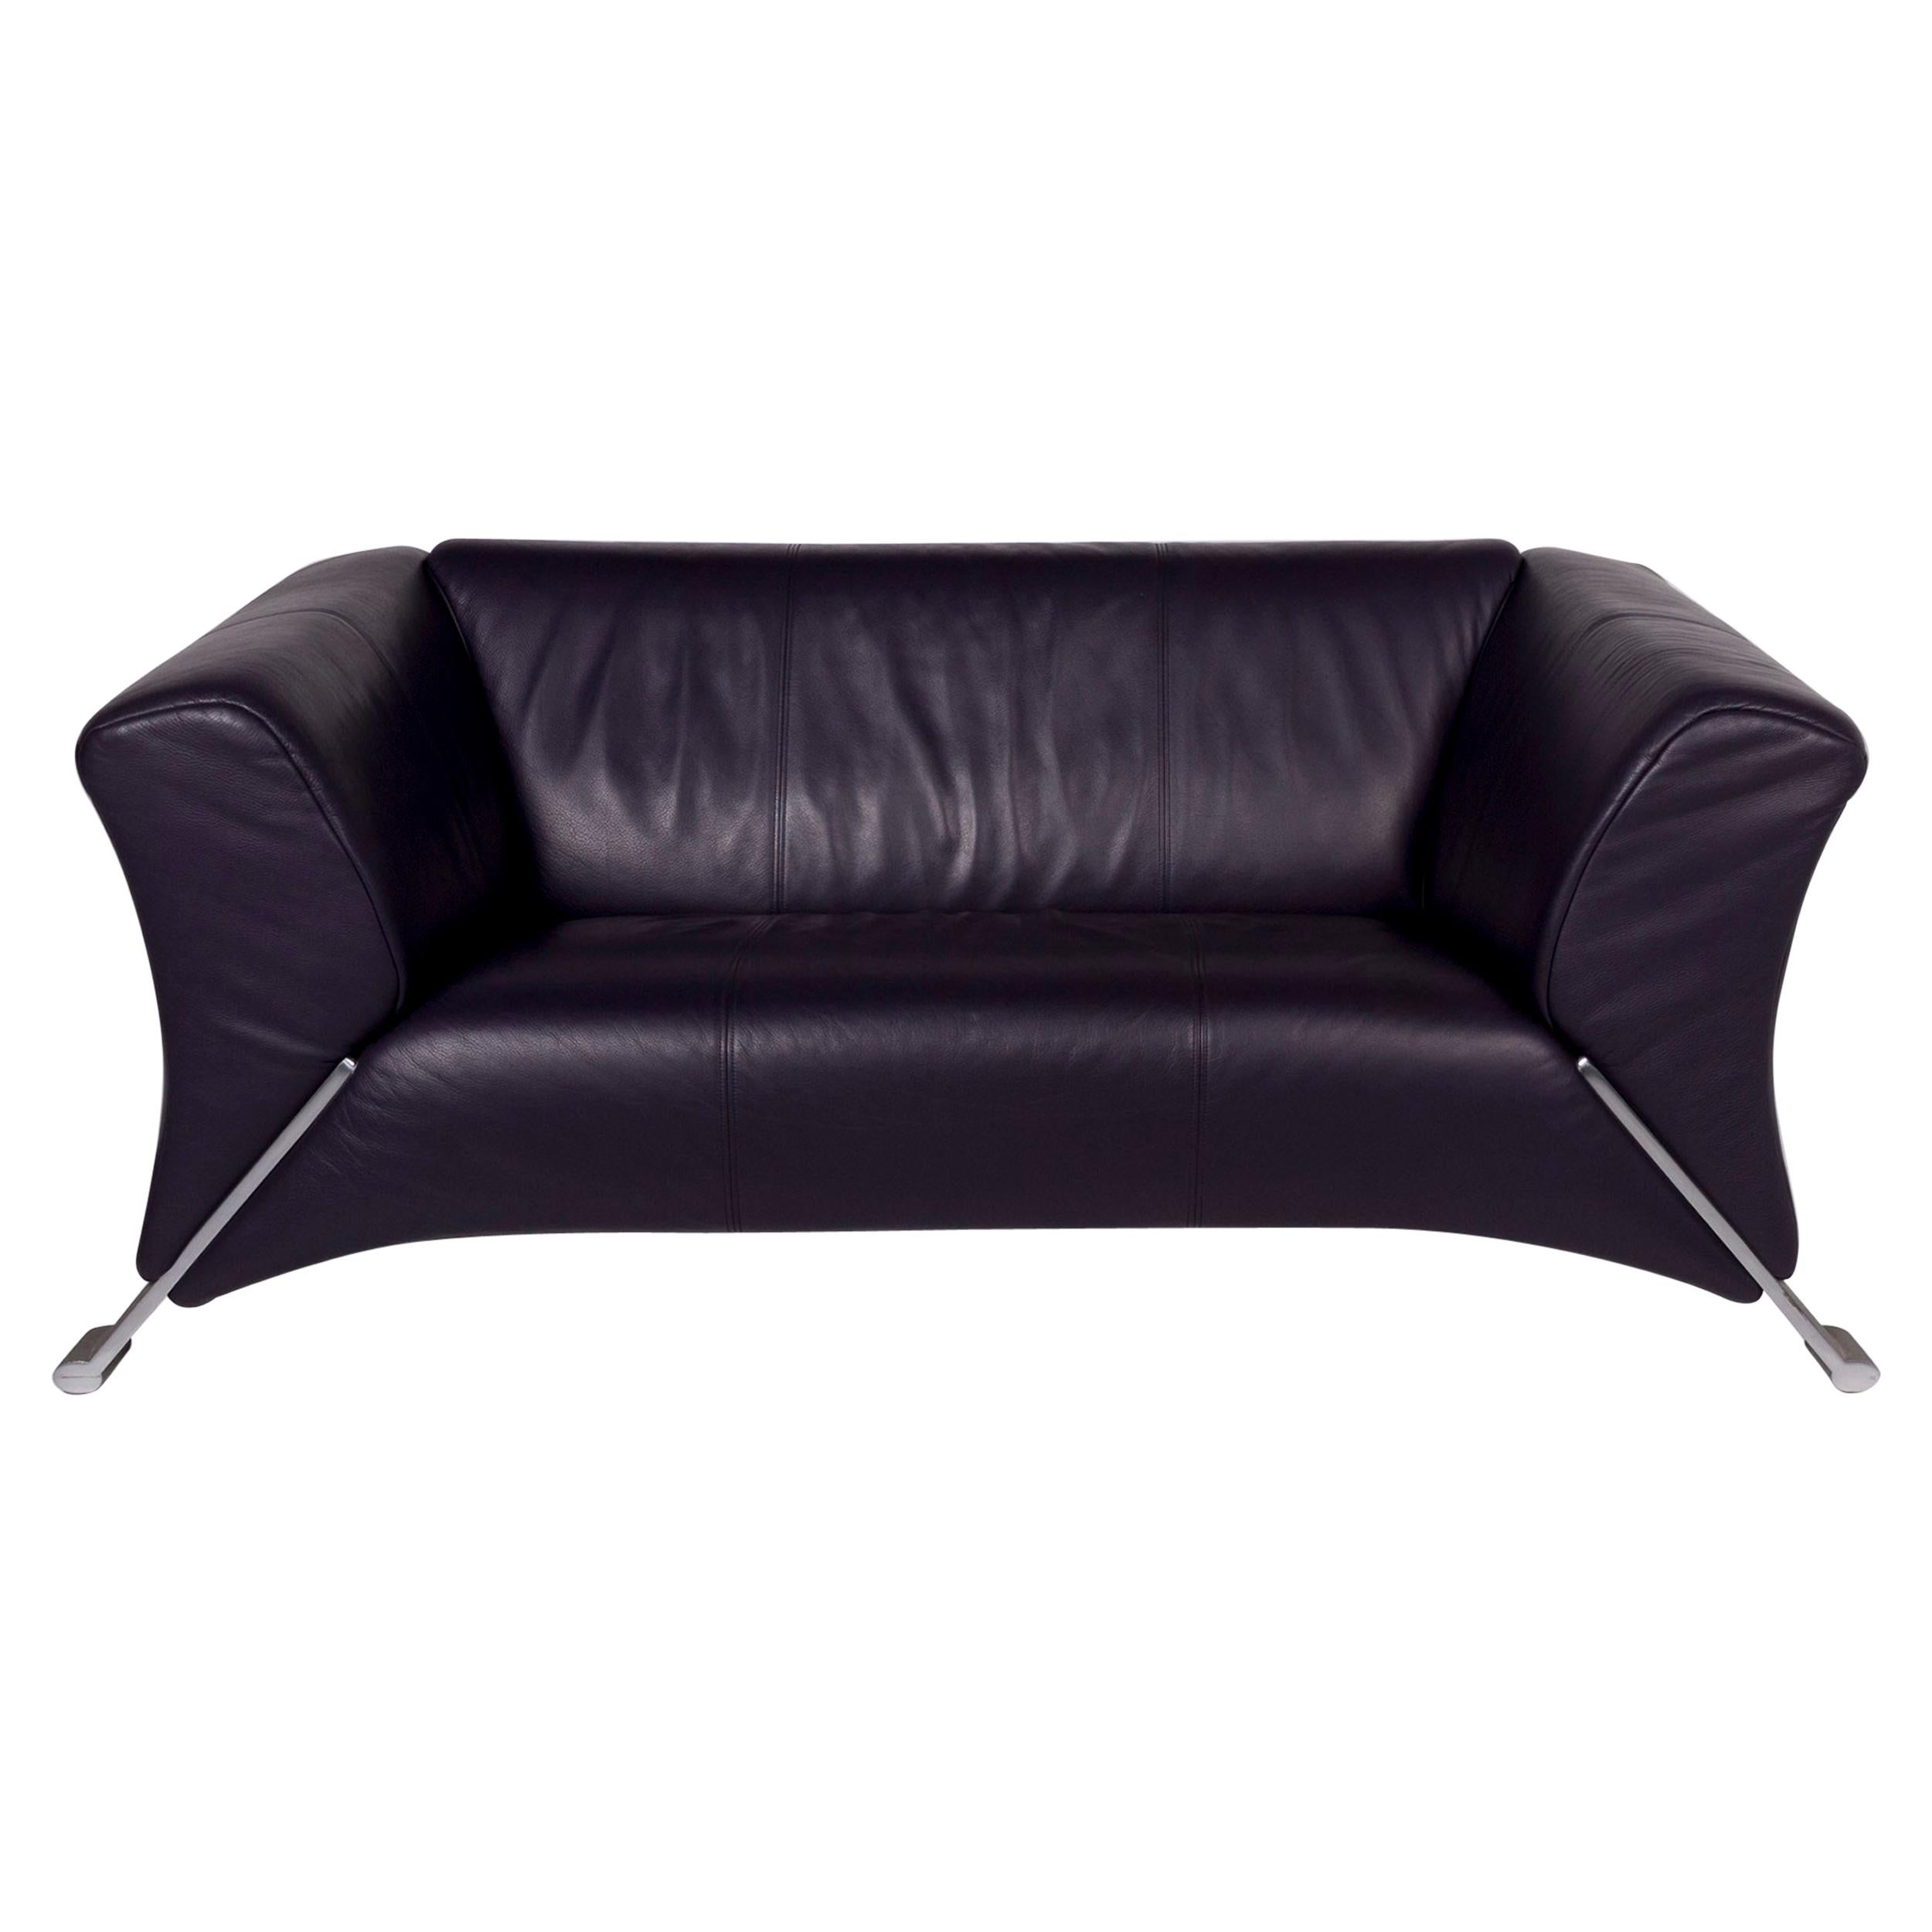 Rolf Benz 322 Leather Sofa Violet Two-Seat Couch For Sale